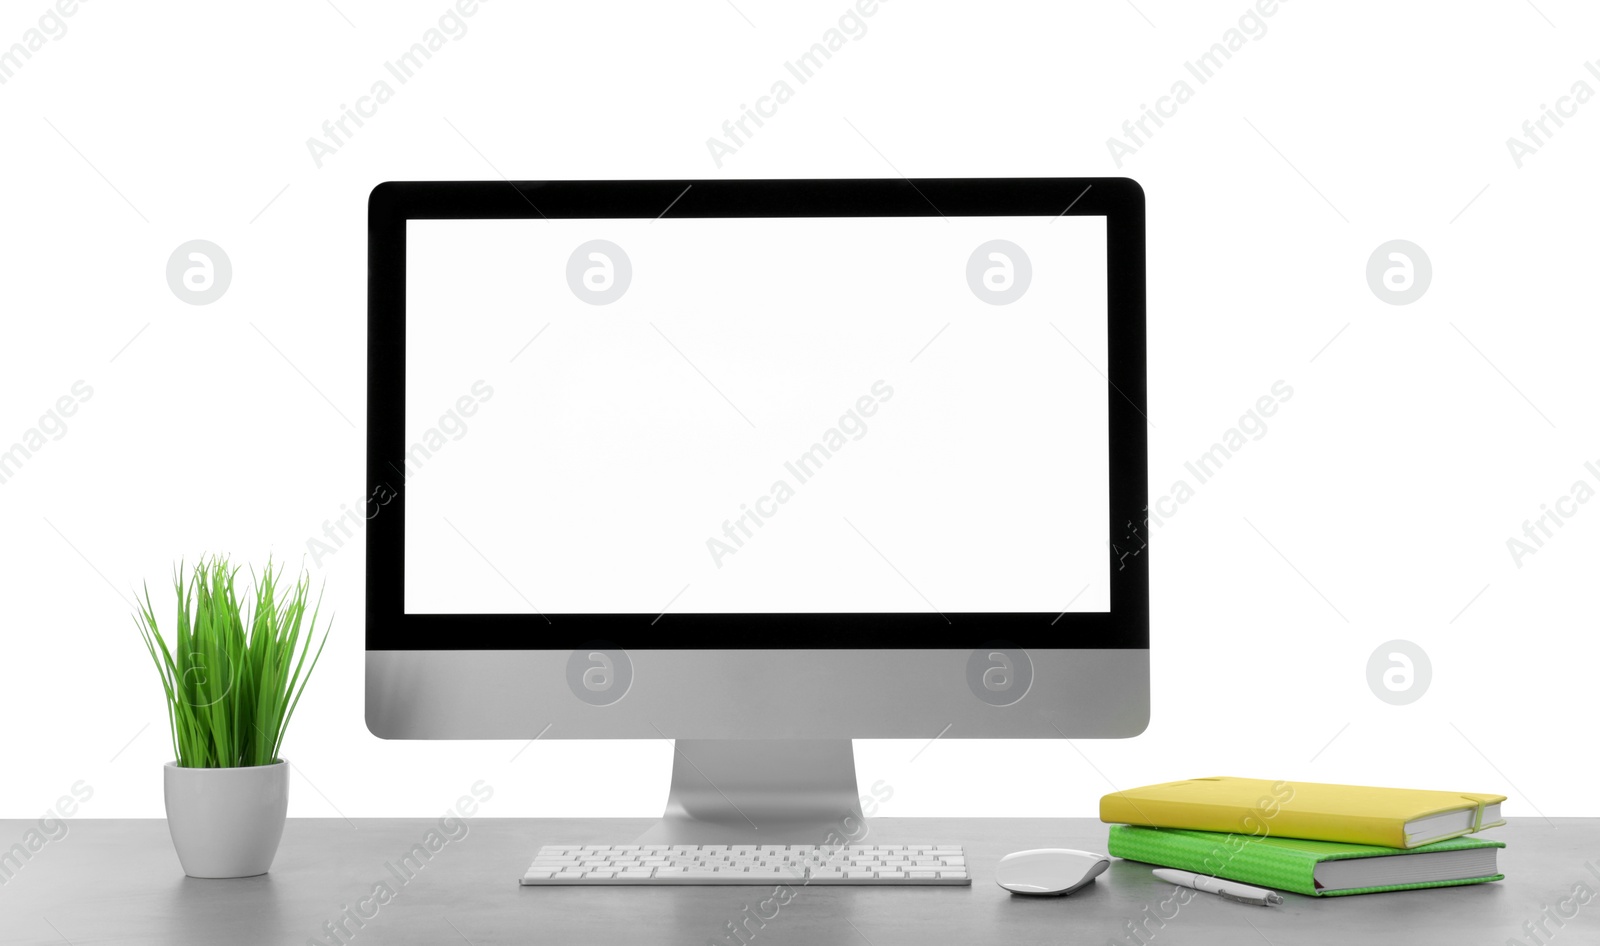 Photo of Computer, potted plant and notebooks on table against white background. Stylish workplace